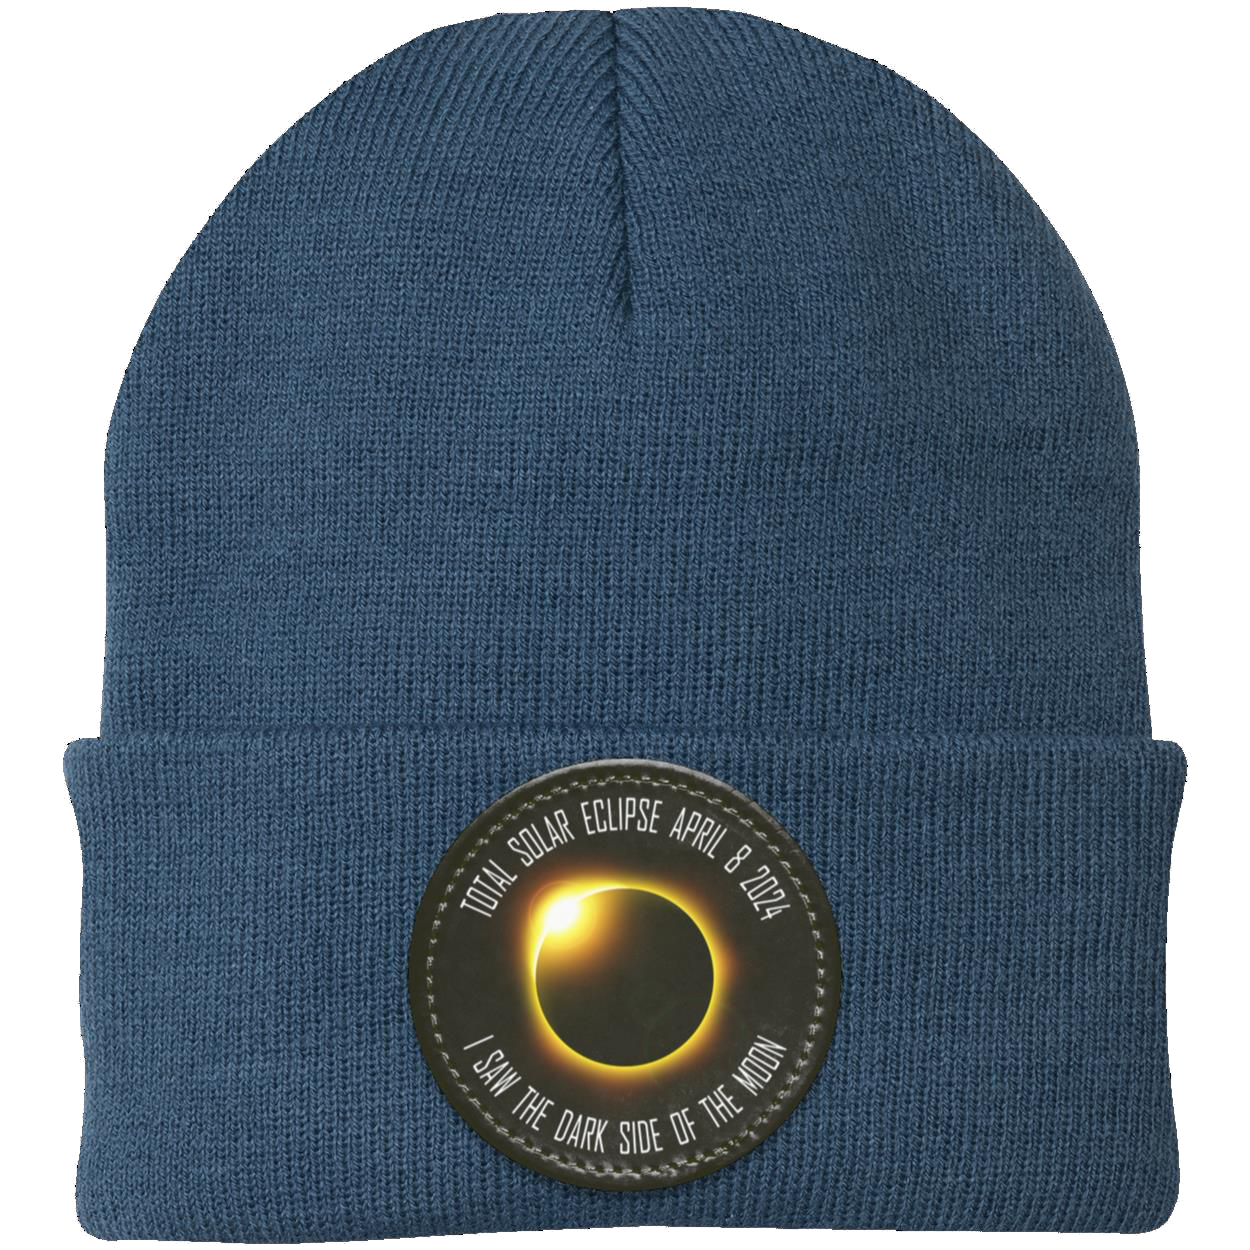 Total Solar Eclipse April 8 2024 eclipse beanie, I Saw the Dark Side of the Moon hat, Knit Cap - Patch